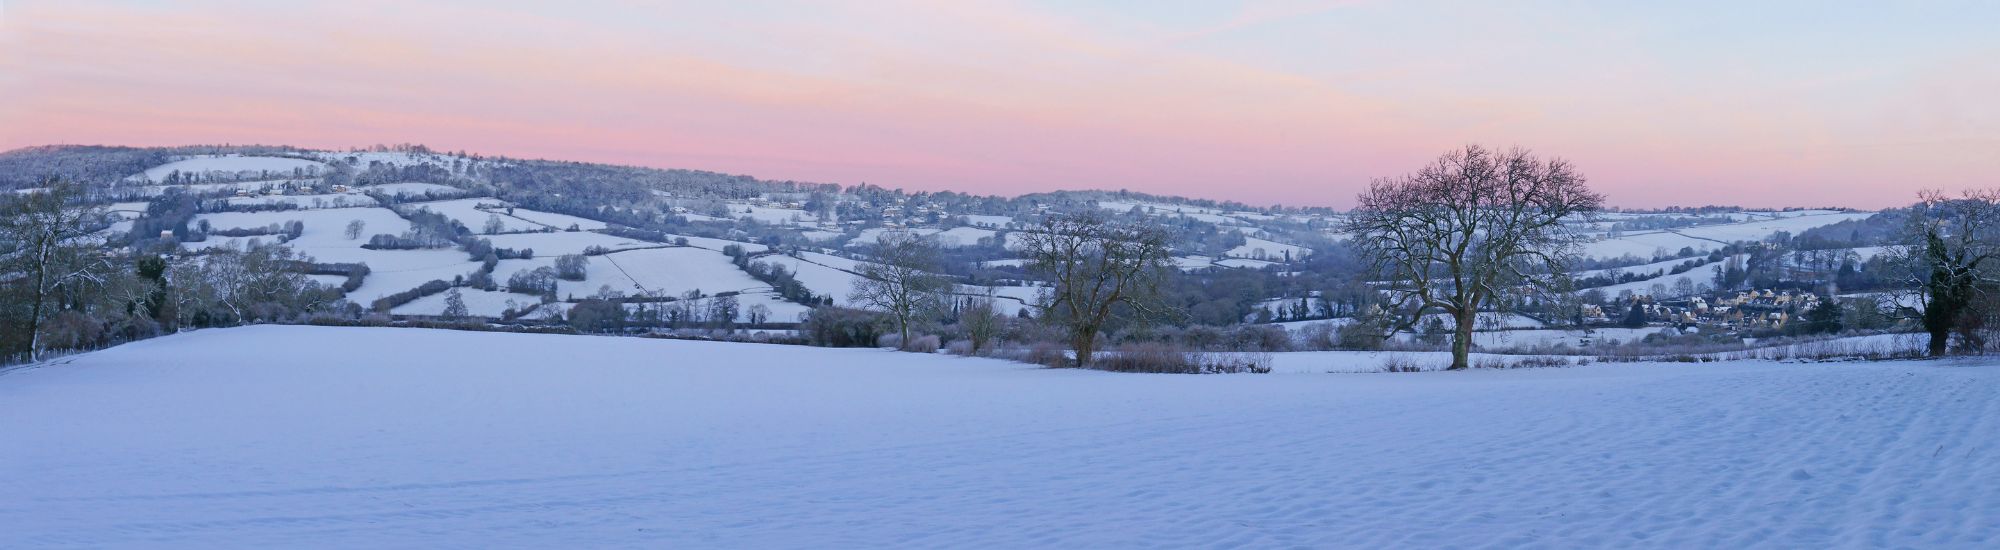 tourhub | Just Go Holidays | Christmastime in the Cotswolds & Oxford 